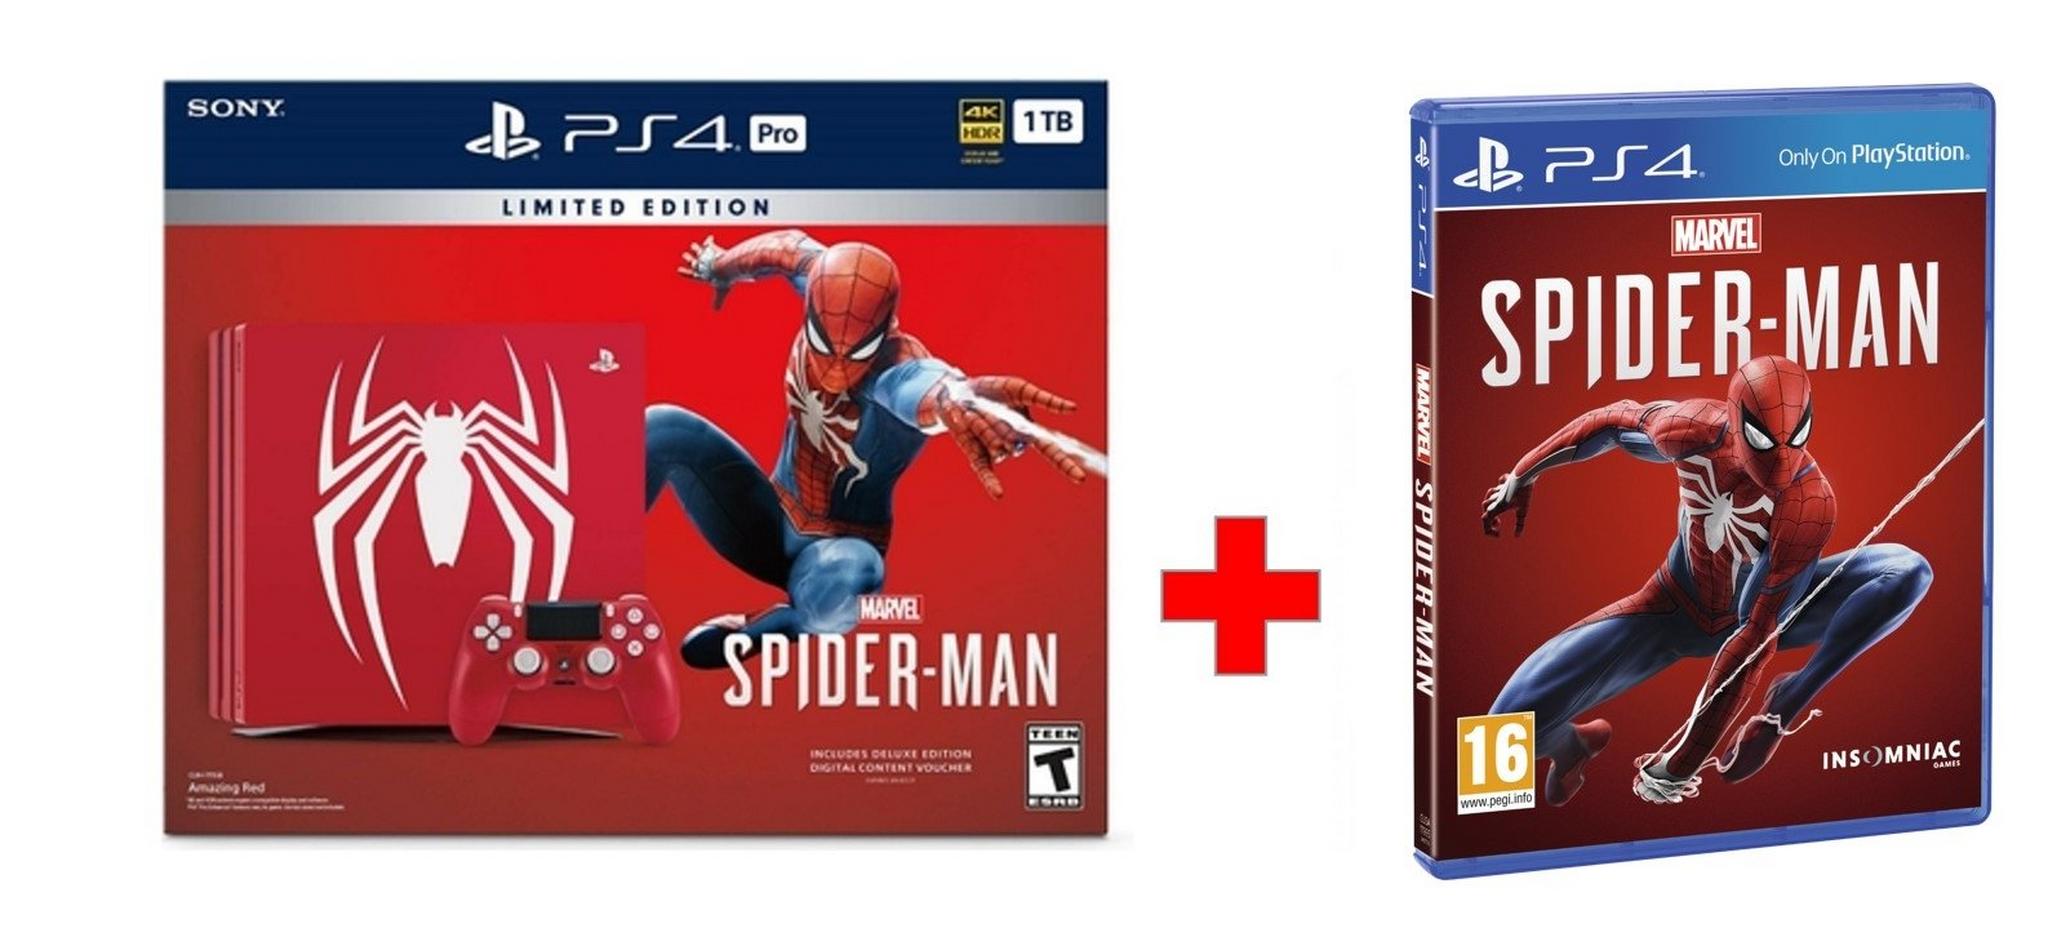 Spider Man 1TB PS4 PRO Special Edition Console - Red + Marvel Spider Man Game